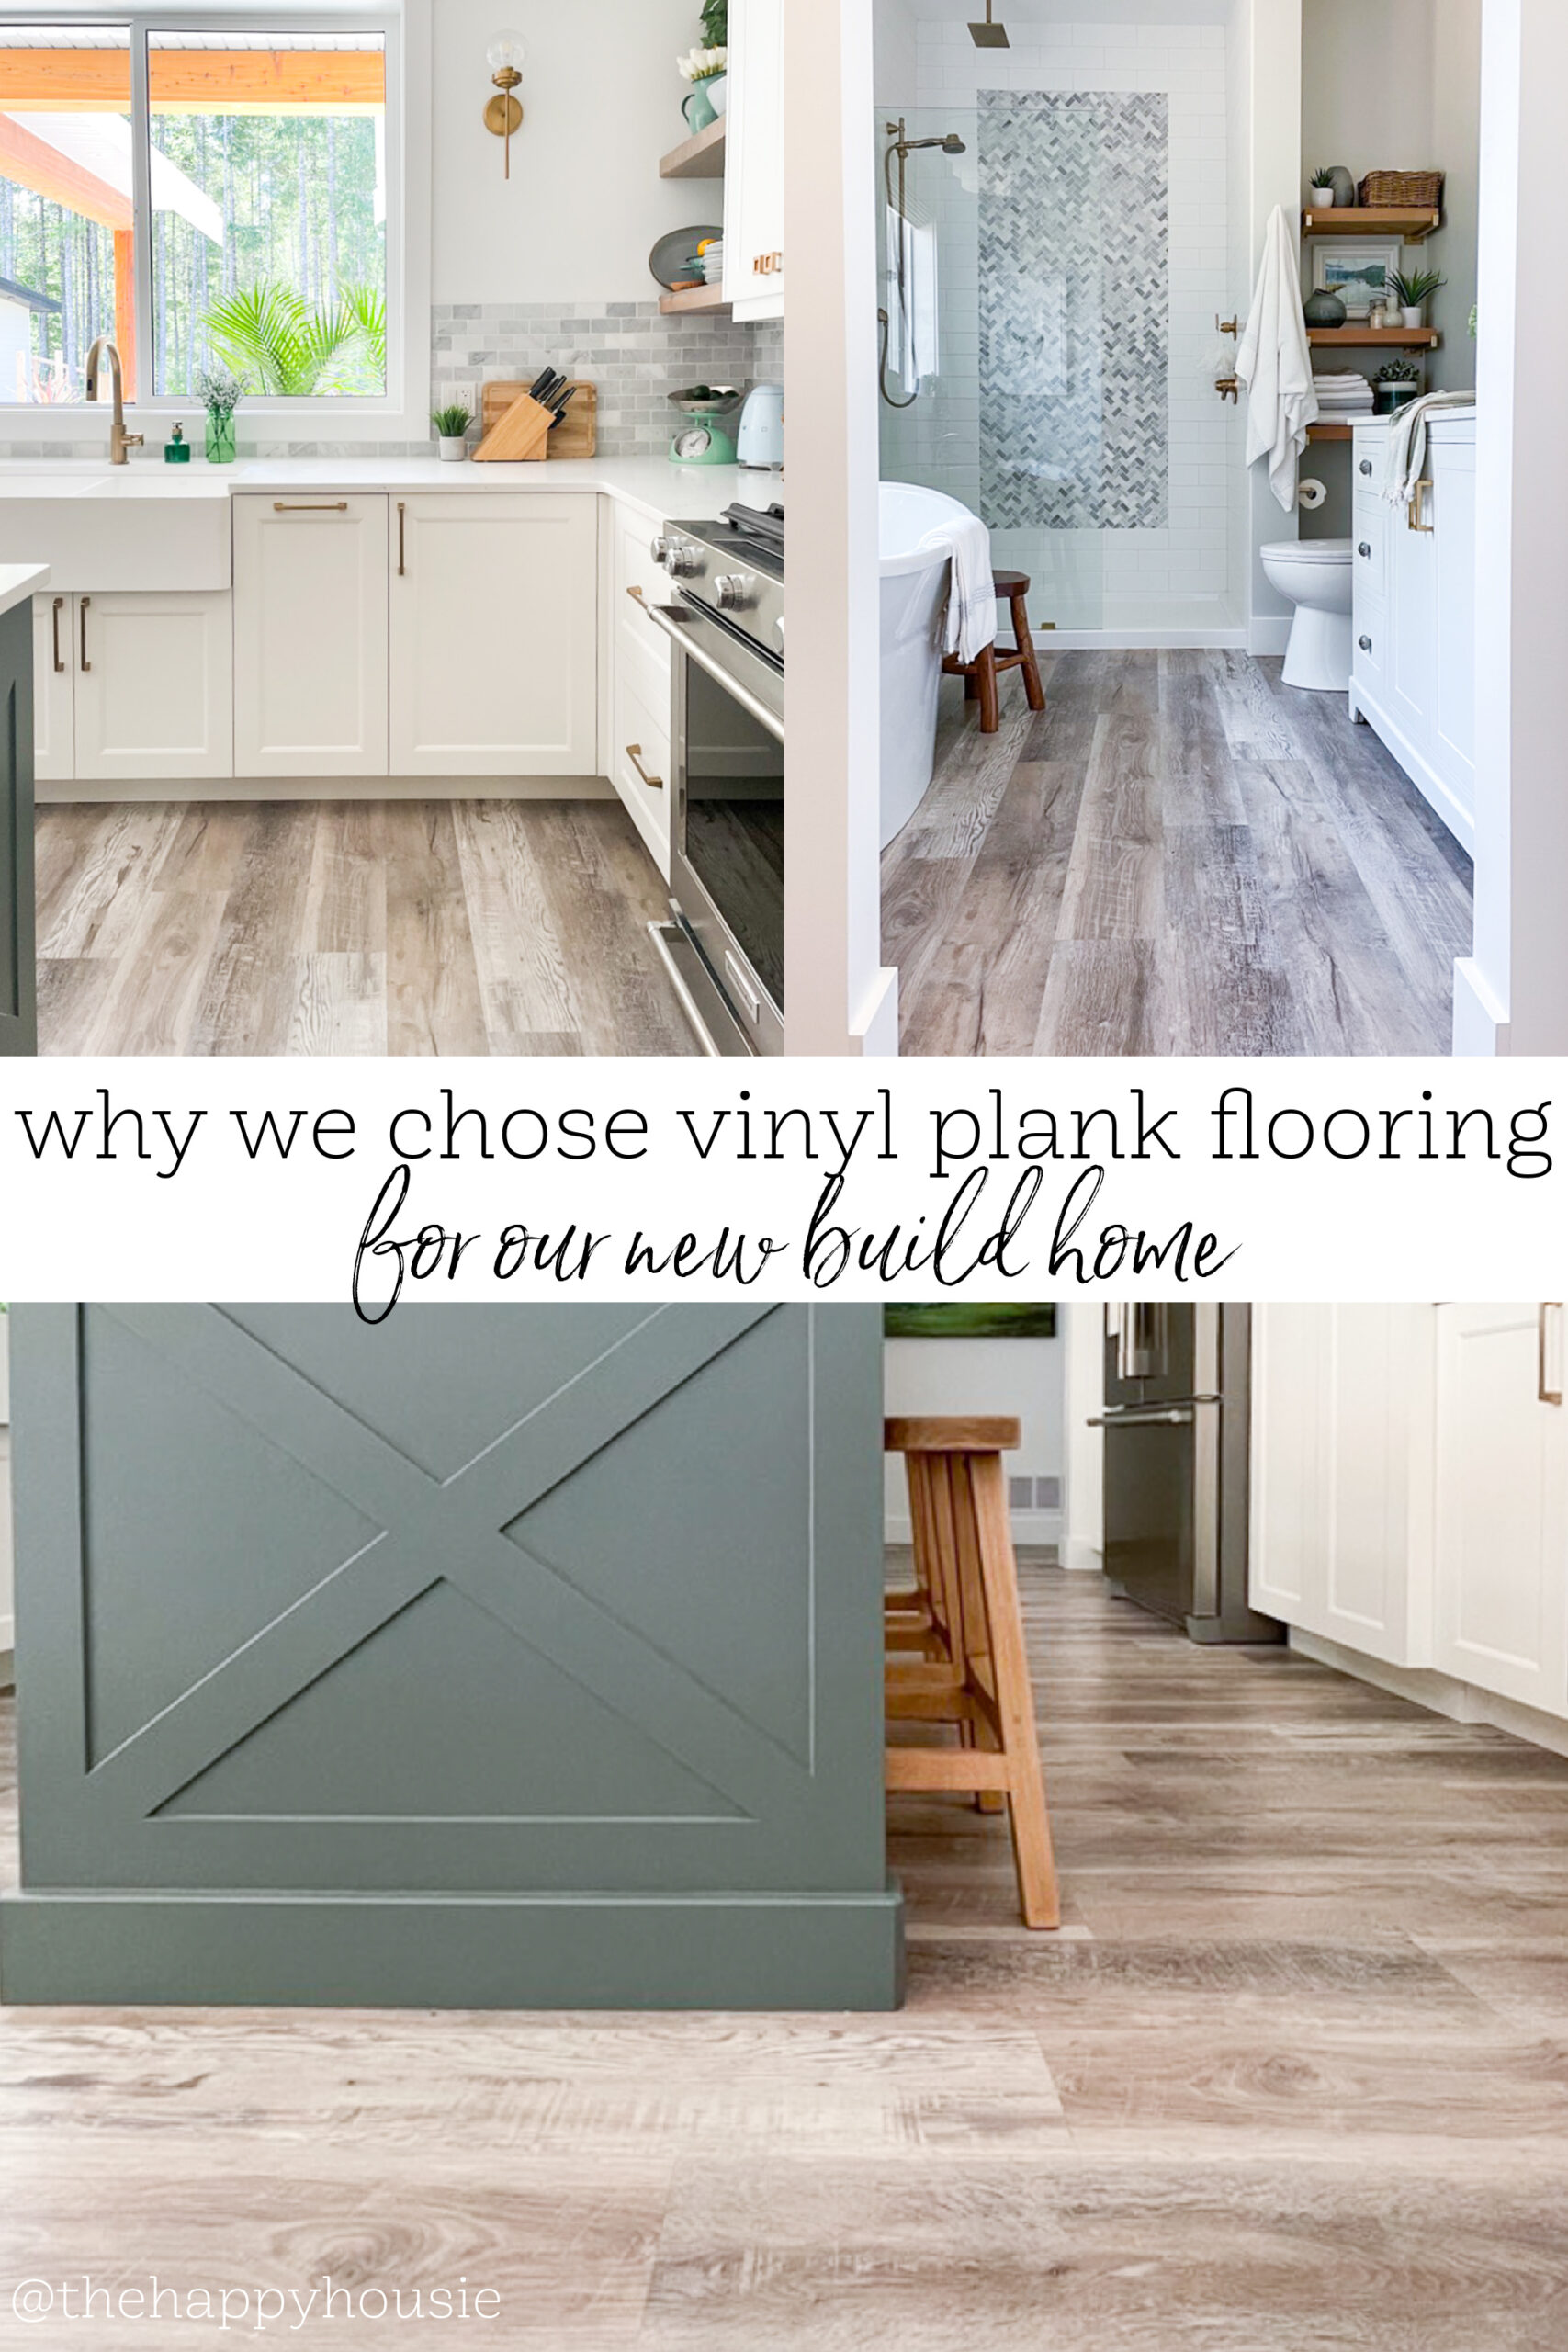 a collage image featuring vinyl plank flooring a kitchen and bathroom